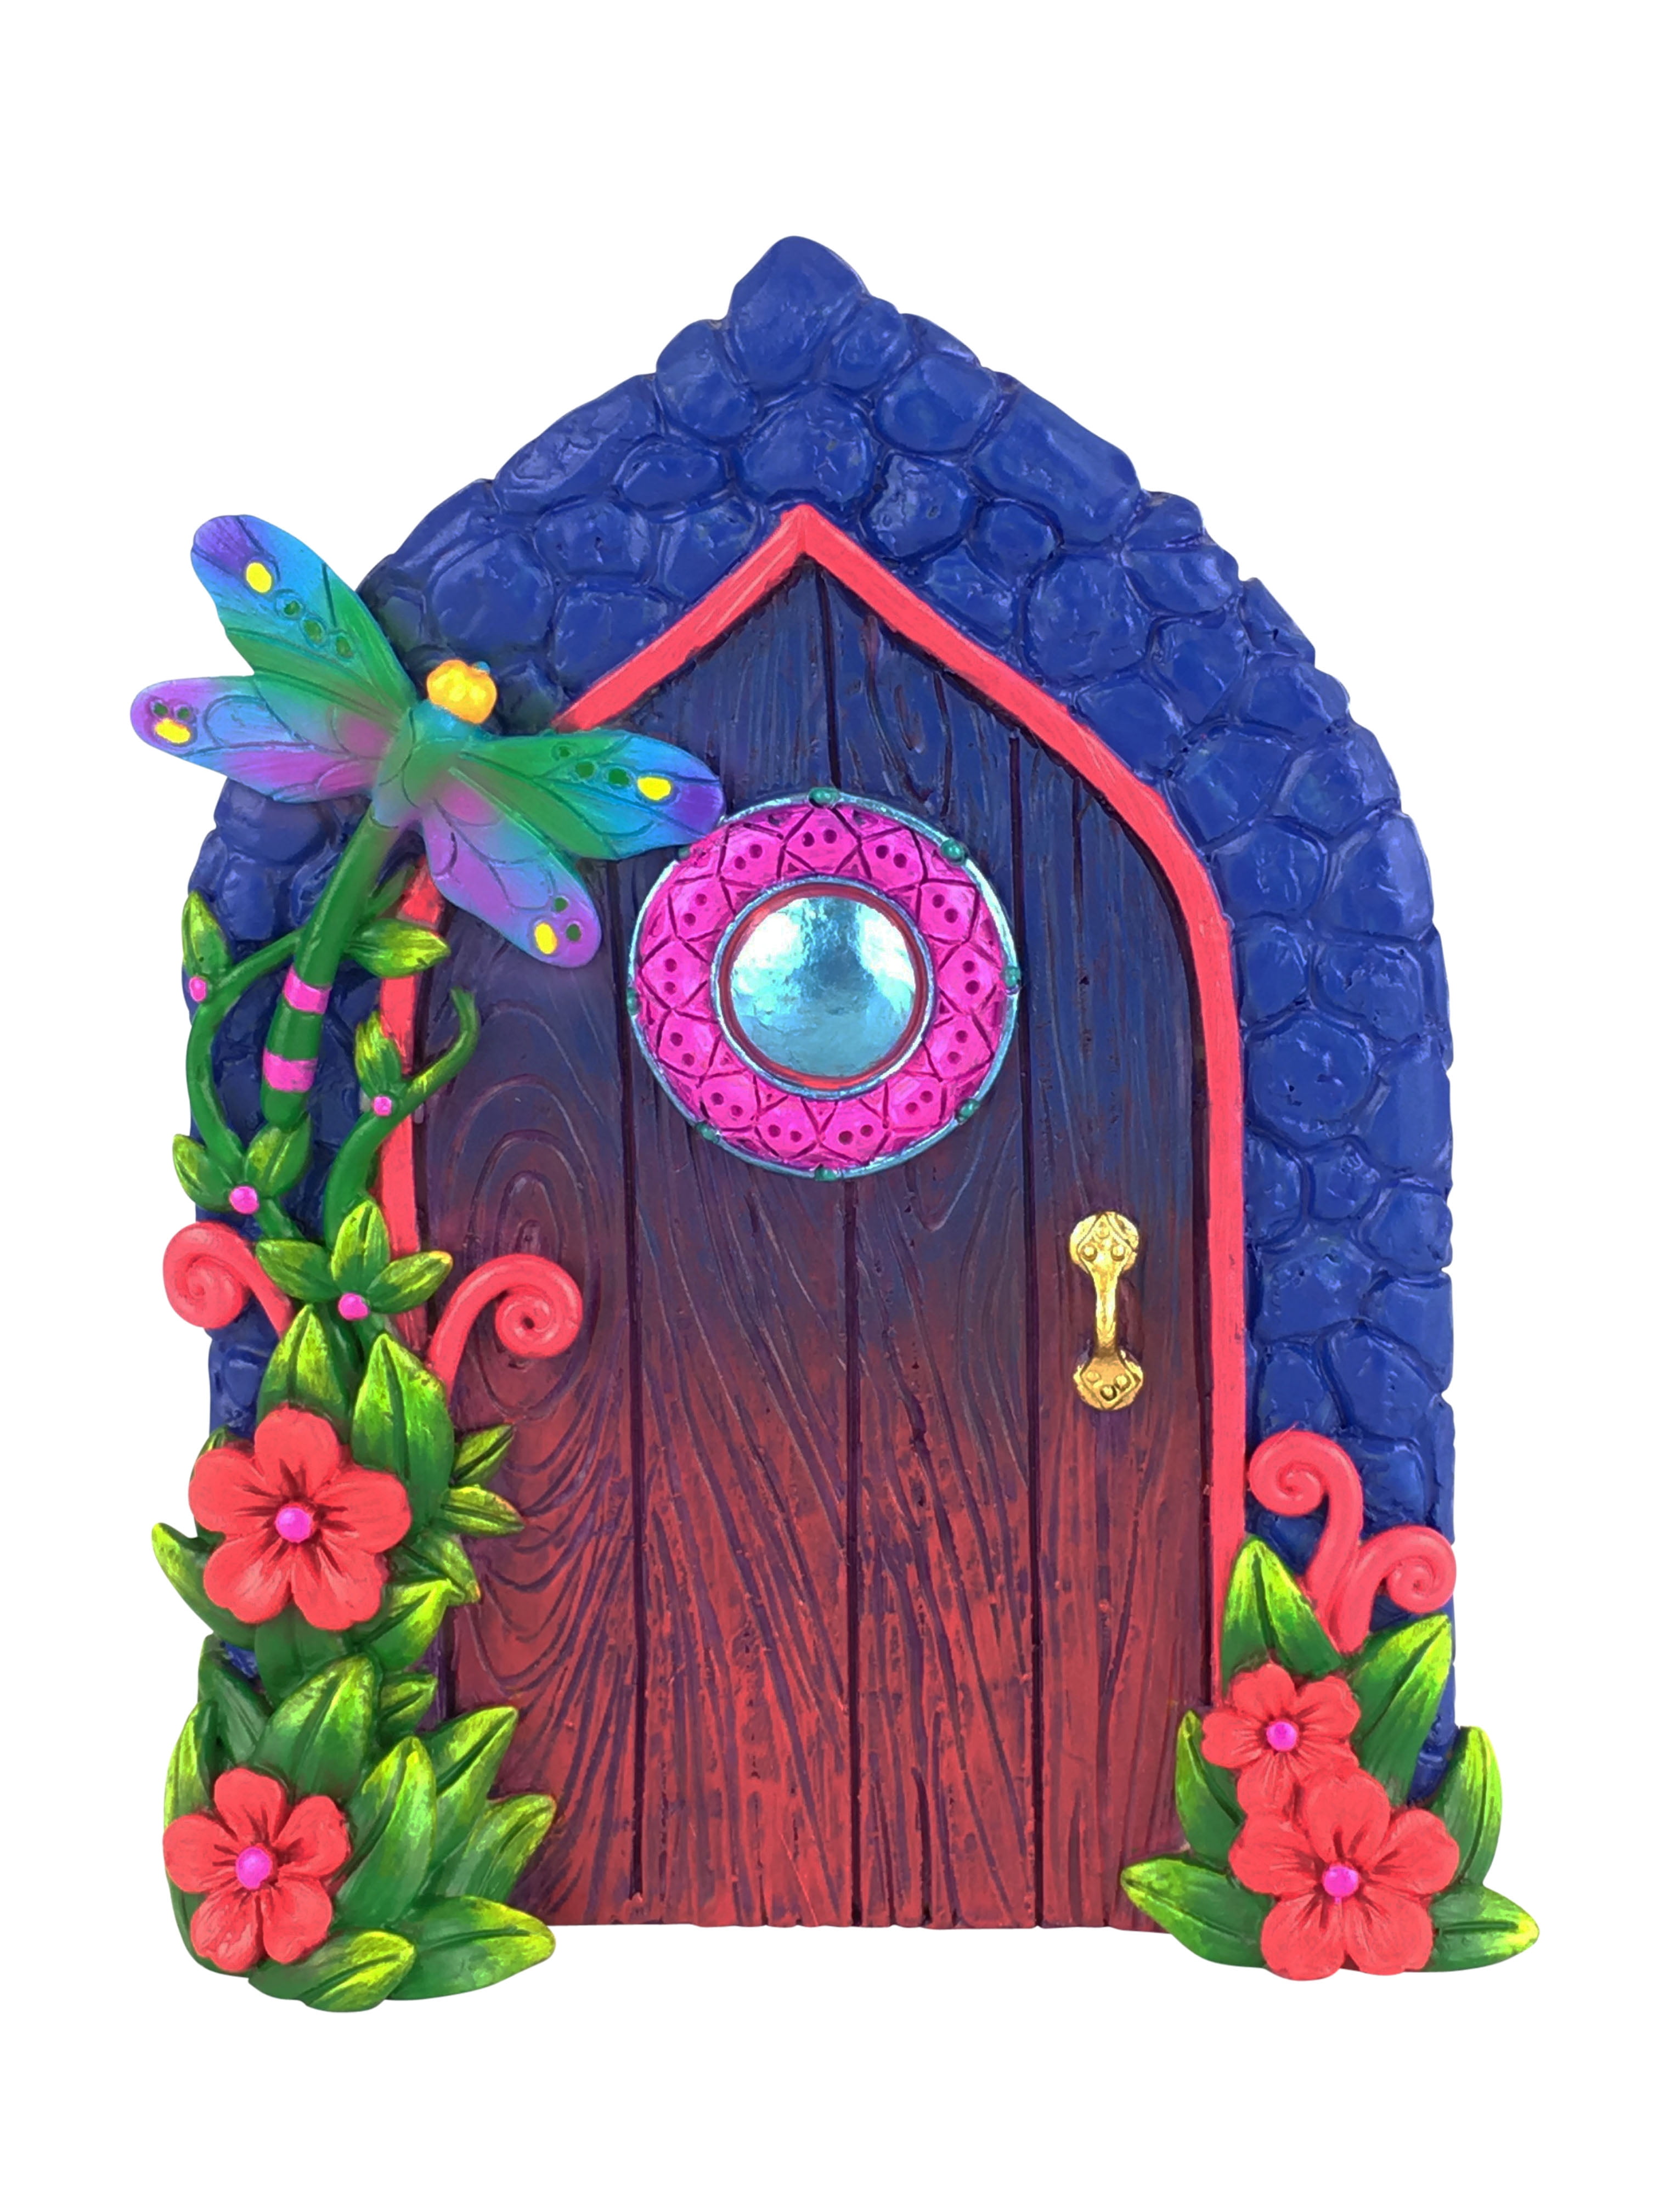 90 x 70 cm Wall Sticker Mushroom for Fairies and Gnomes with a Blue Fairy Door with Glow-in-the-Dark Window